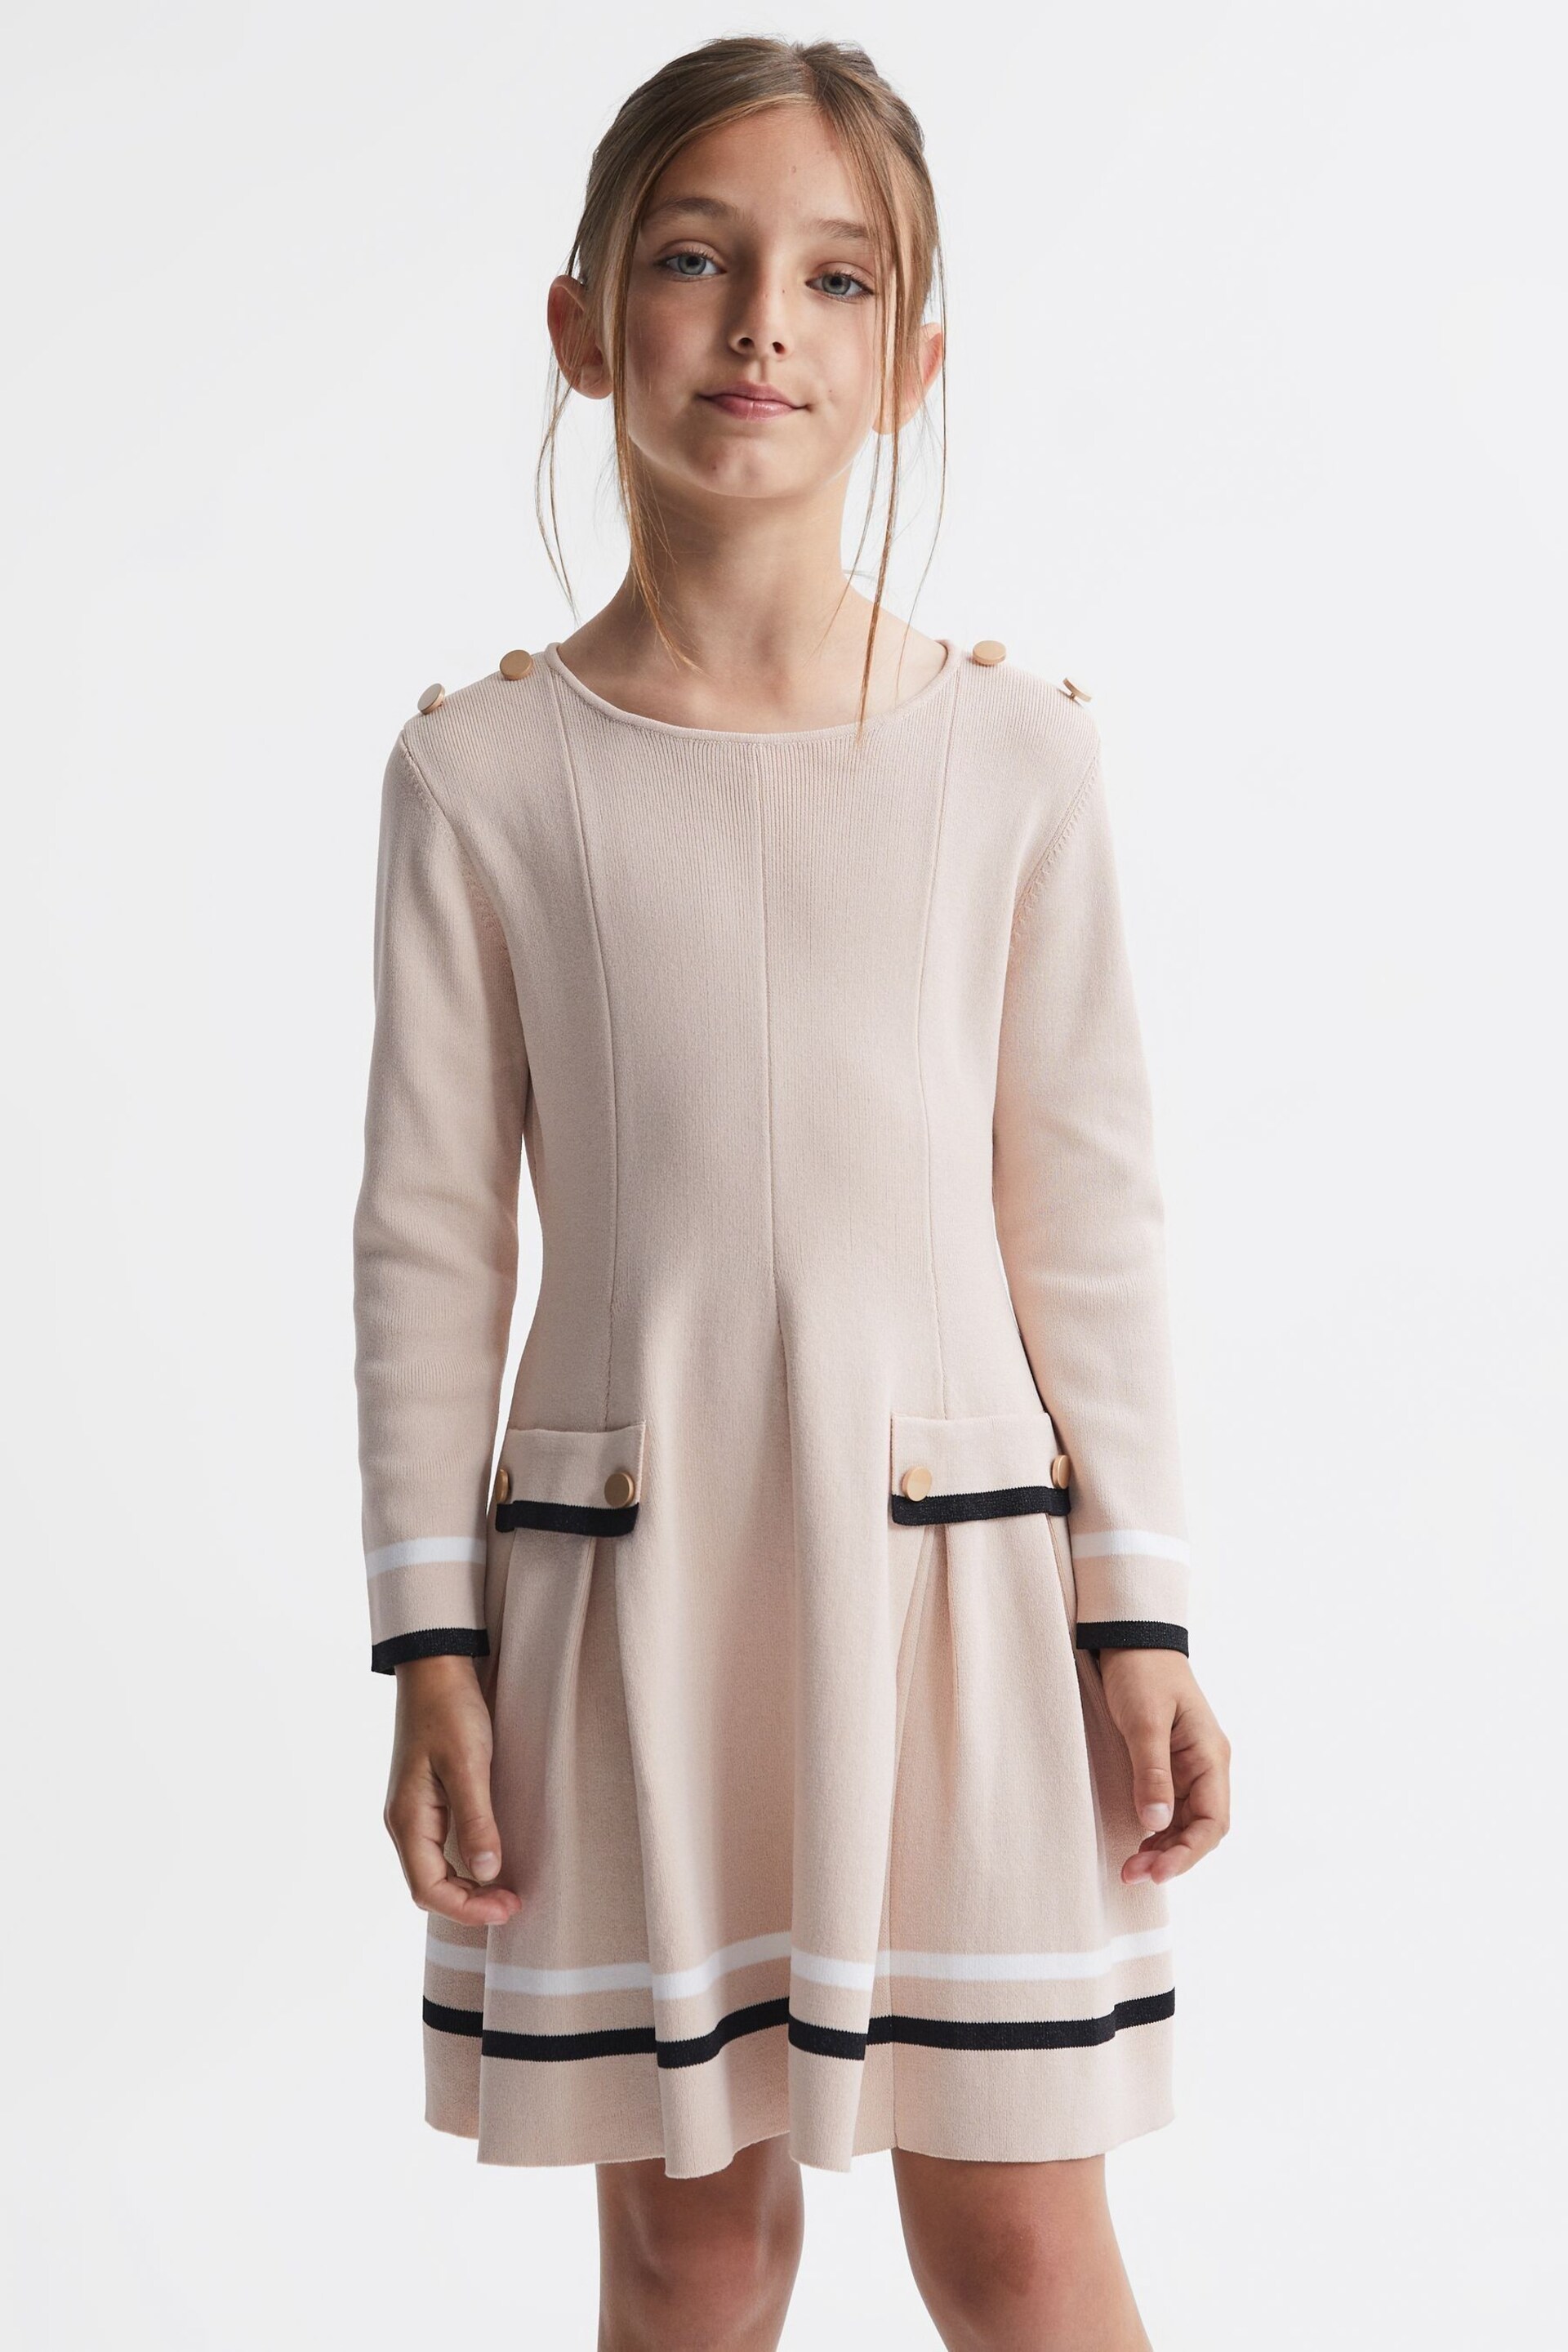 Reiss Pink Paige Junior Knitted Flared Dress - Image 3 of 5